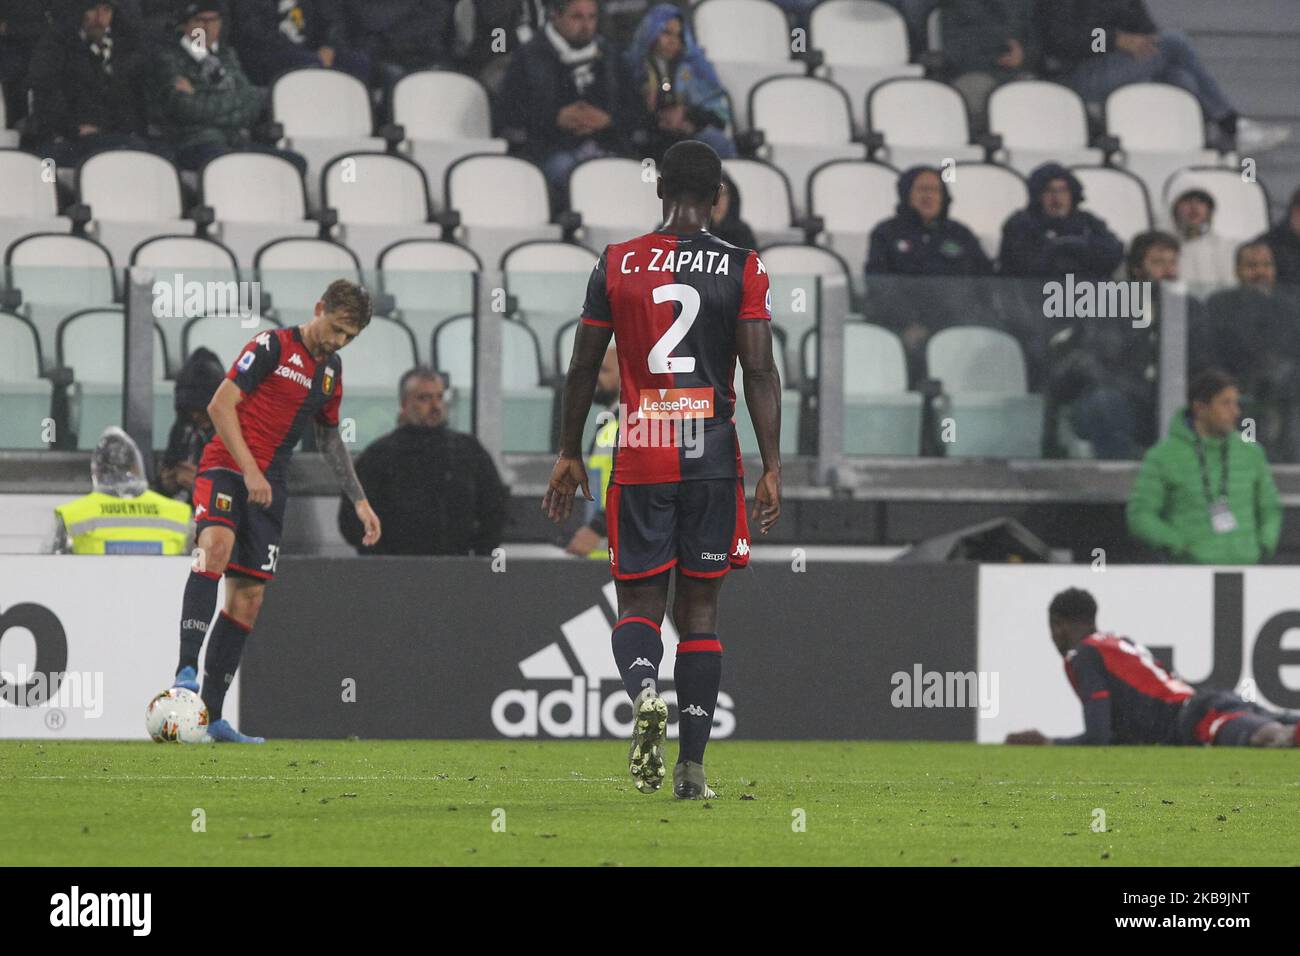 Cristian Zapata of Genoa CFC during the Serie A football match between Juventus FC and Genoa CFC at Allianz Stadium on October 30, 2019 in Turin, Italy. Juventus won 2-1 over Genoa. (Photo by Massimiliano Ferraro/NurPhoto) Stock Photo